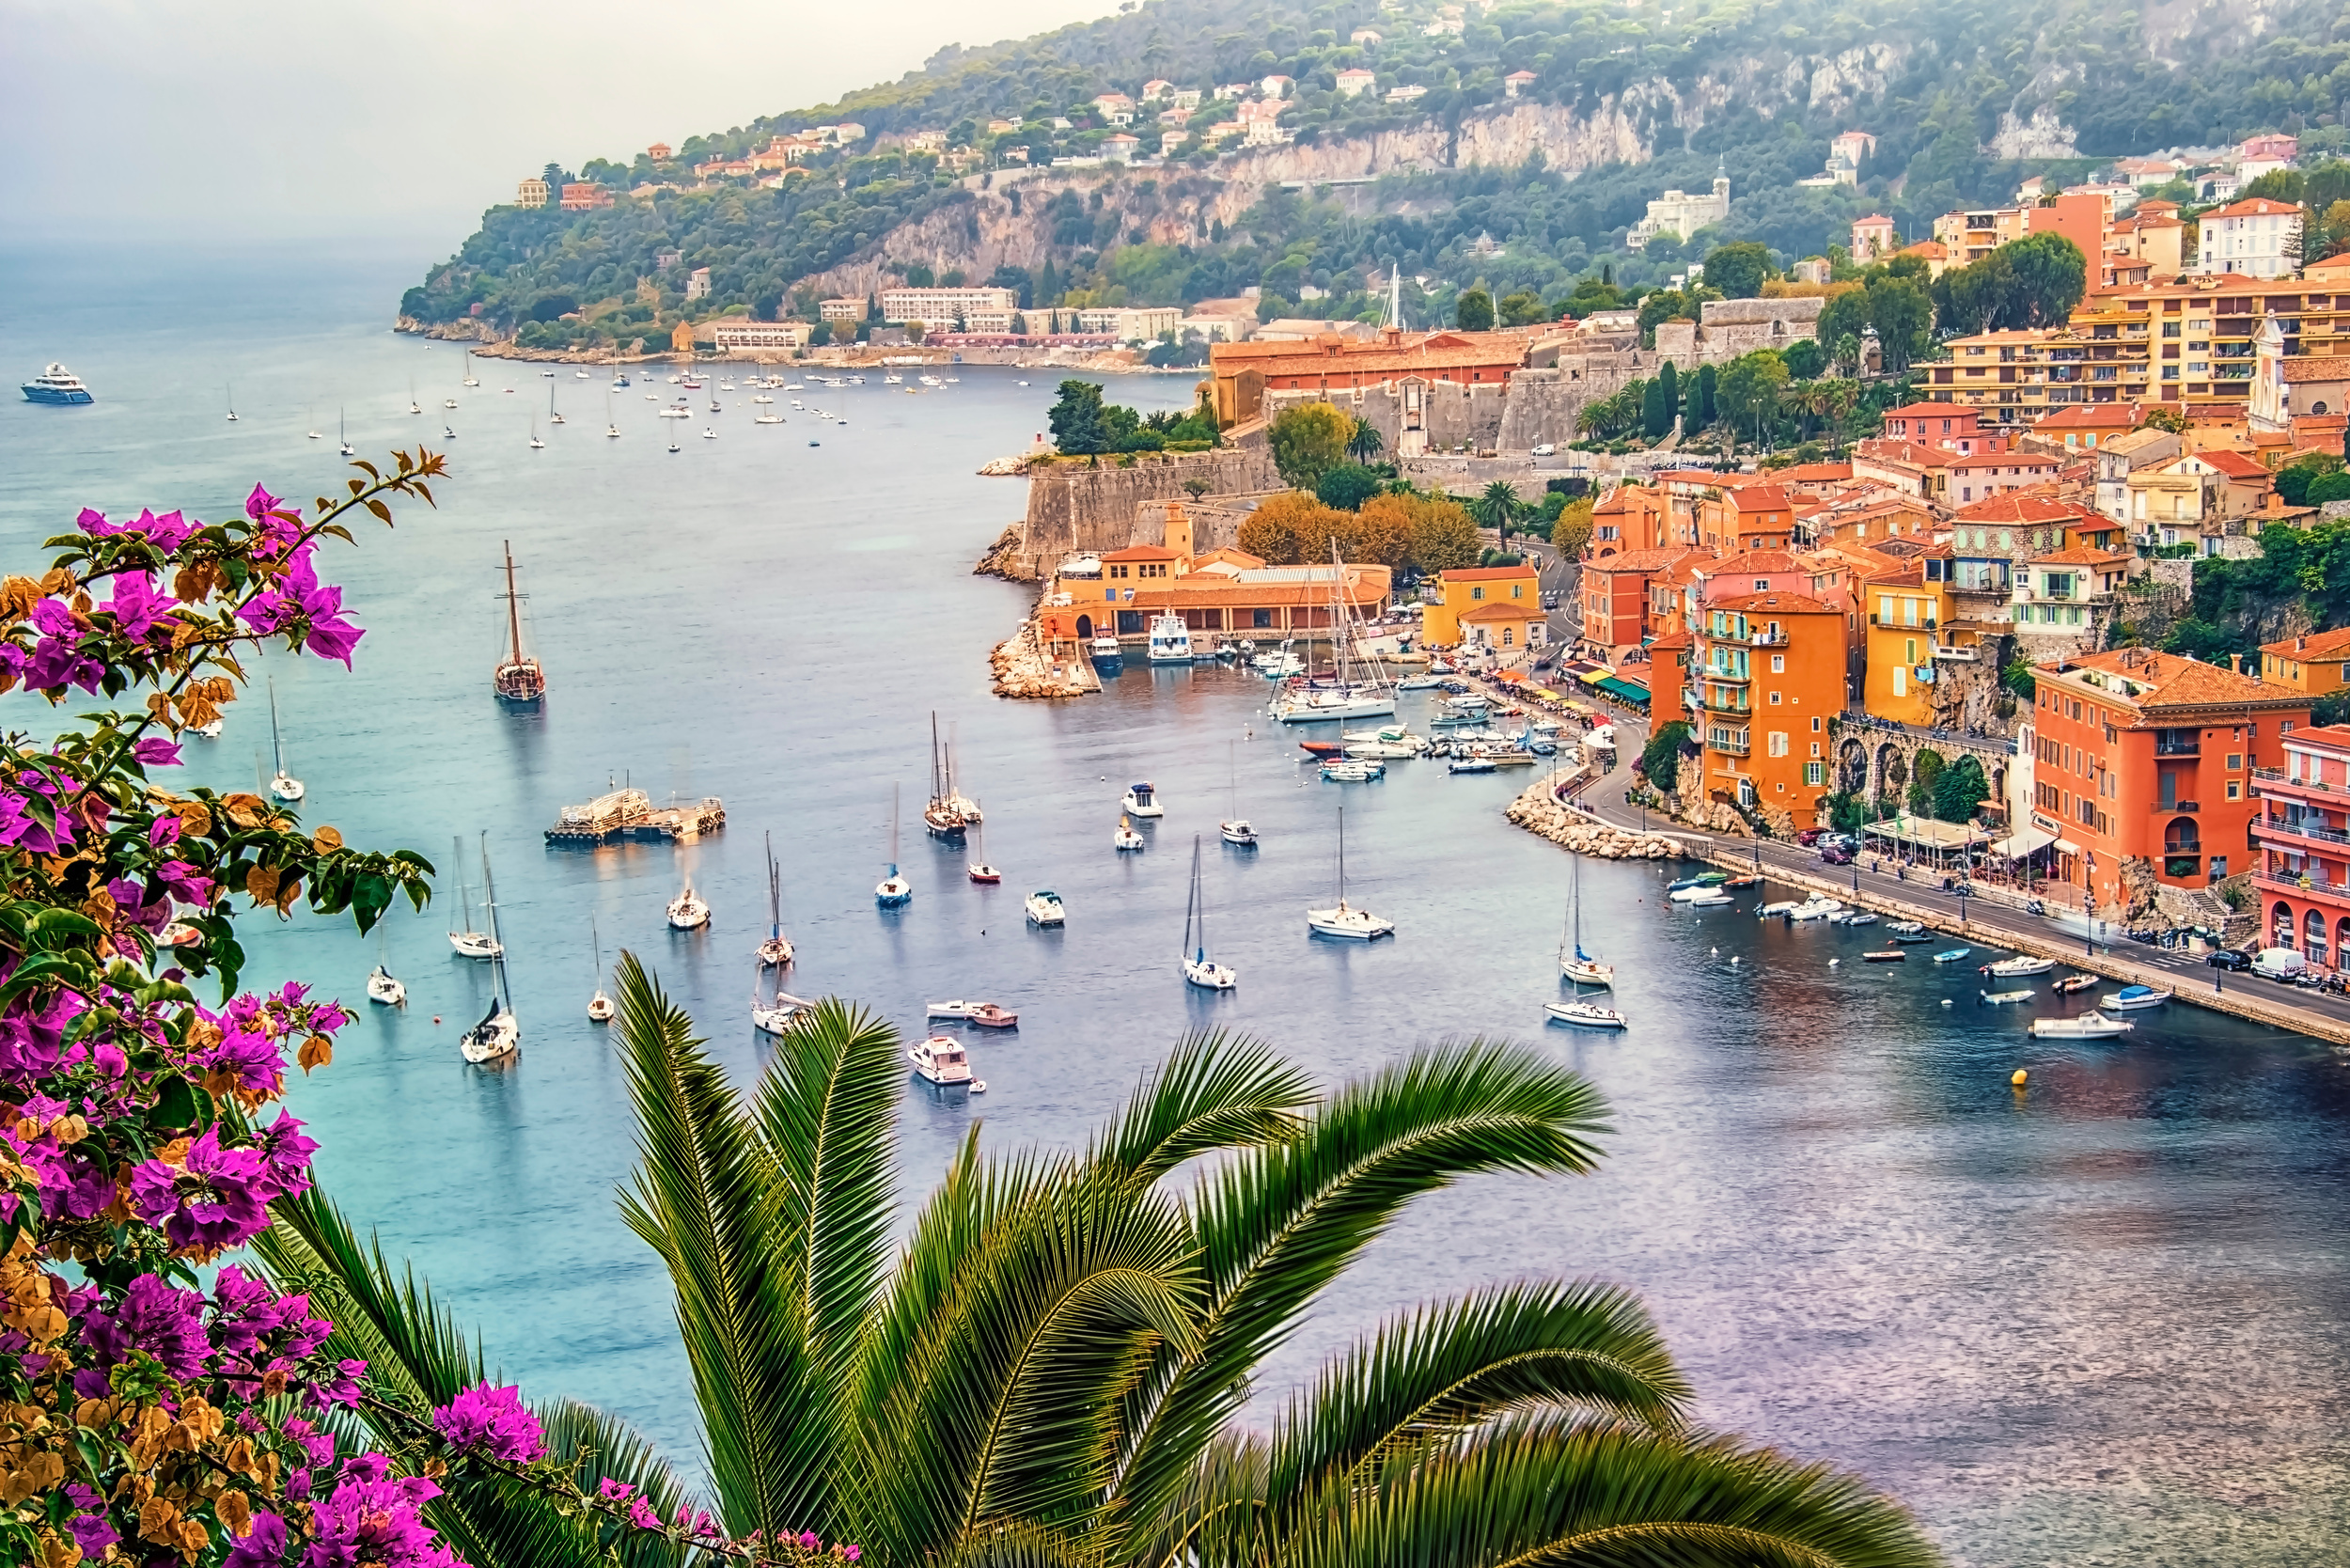 <p>What used to be a lesser-known fishing village is now much more popular thanks to the hit series <em>Emily in Paris</em>. In the second episode of the second season, the character French people love to hate wakes up in this picturesque town on the French Riviera. Villefranche-sur-Mer is quieter than other locations in the area, but that’s what makes it the perfect vacation spot.</p><p>You may also like: <a href='https://www.yardbarker.com/lifestyle/articles/protein_packed_foods_that_will_help_fuel_your_muscles_031324/s1__34248305'>Protein-packed foods that will help fuel your muscles</a></p>